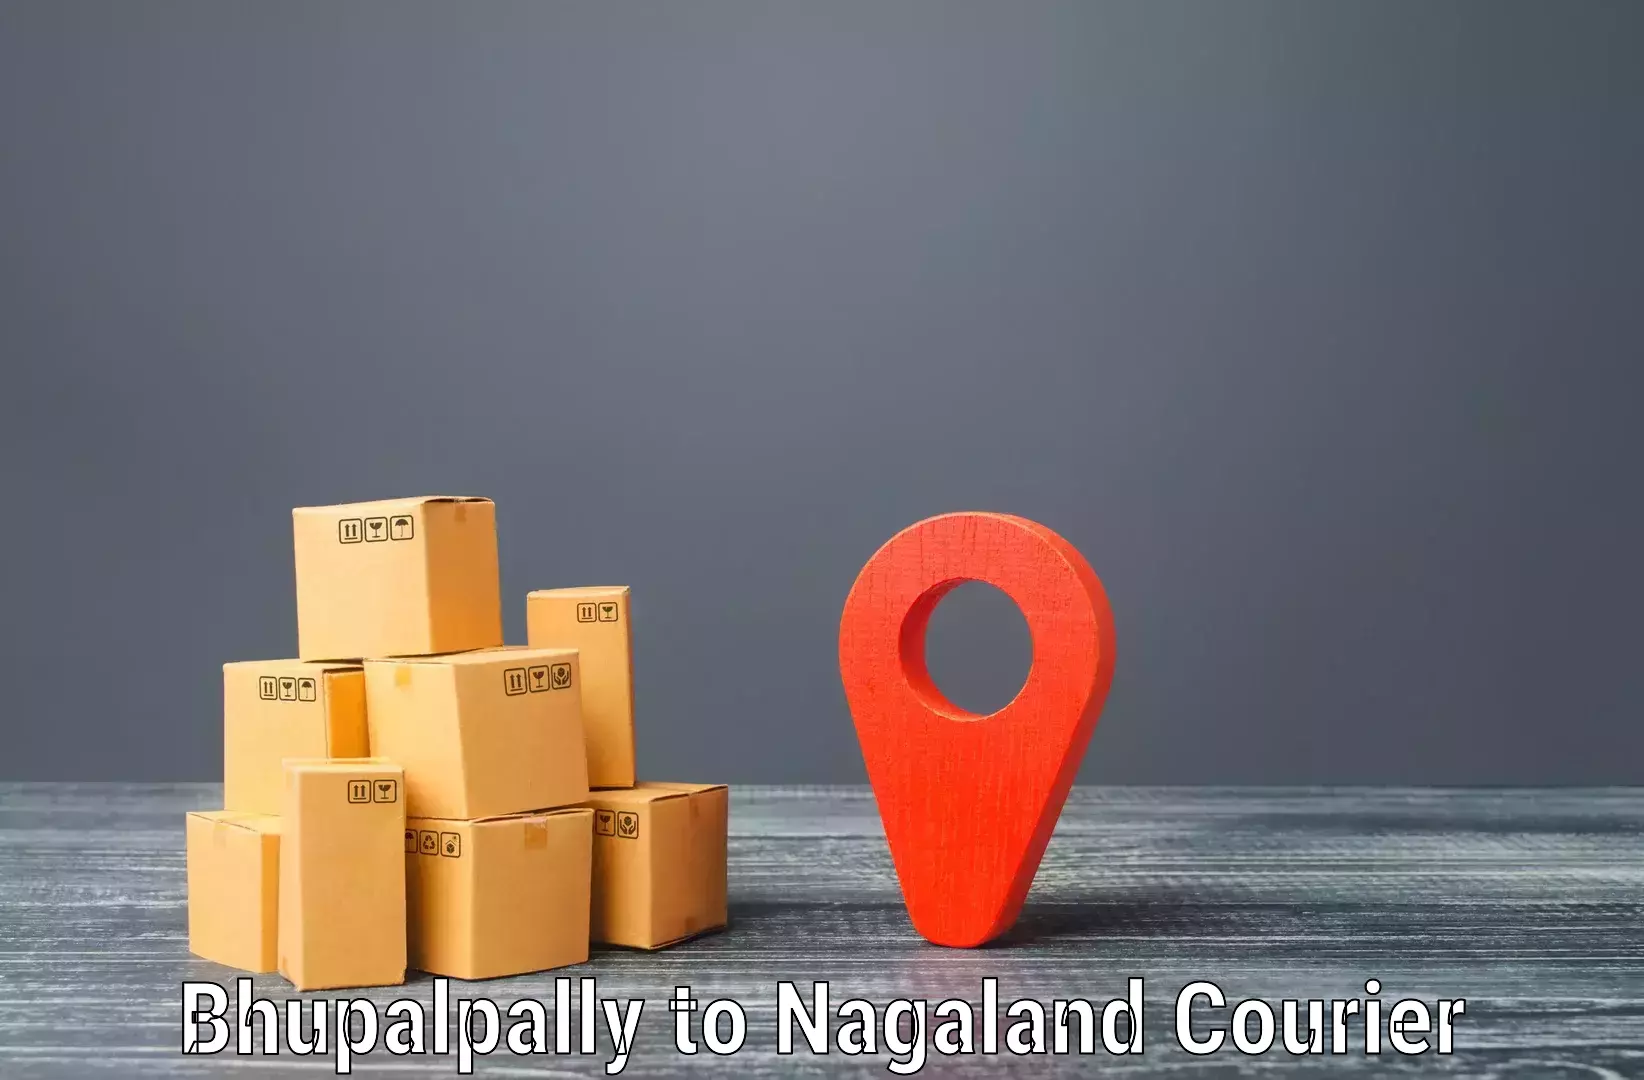 Modern delivery methods Bhupalpally to Nagaland